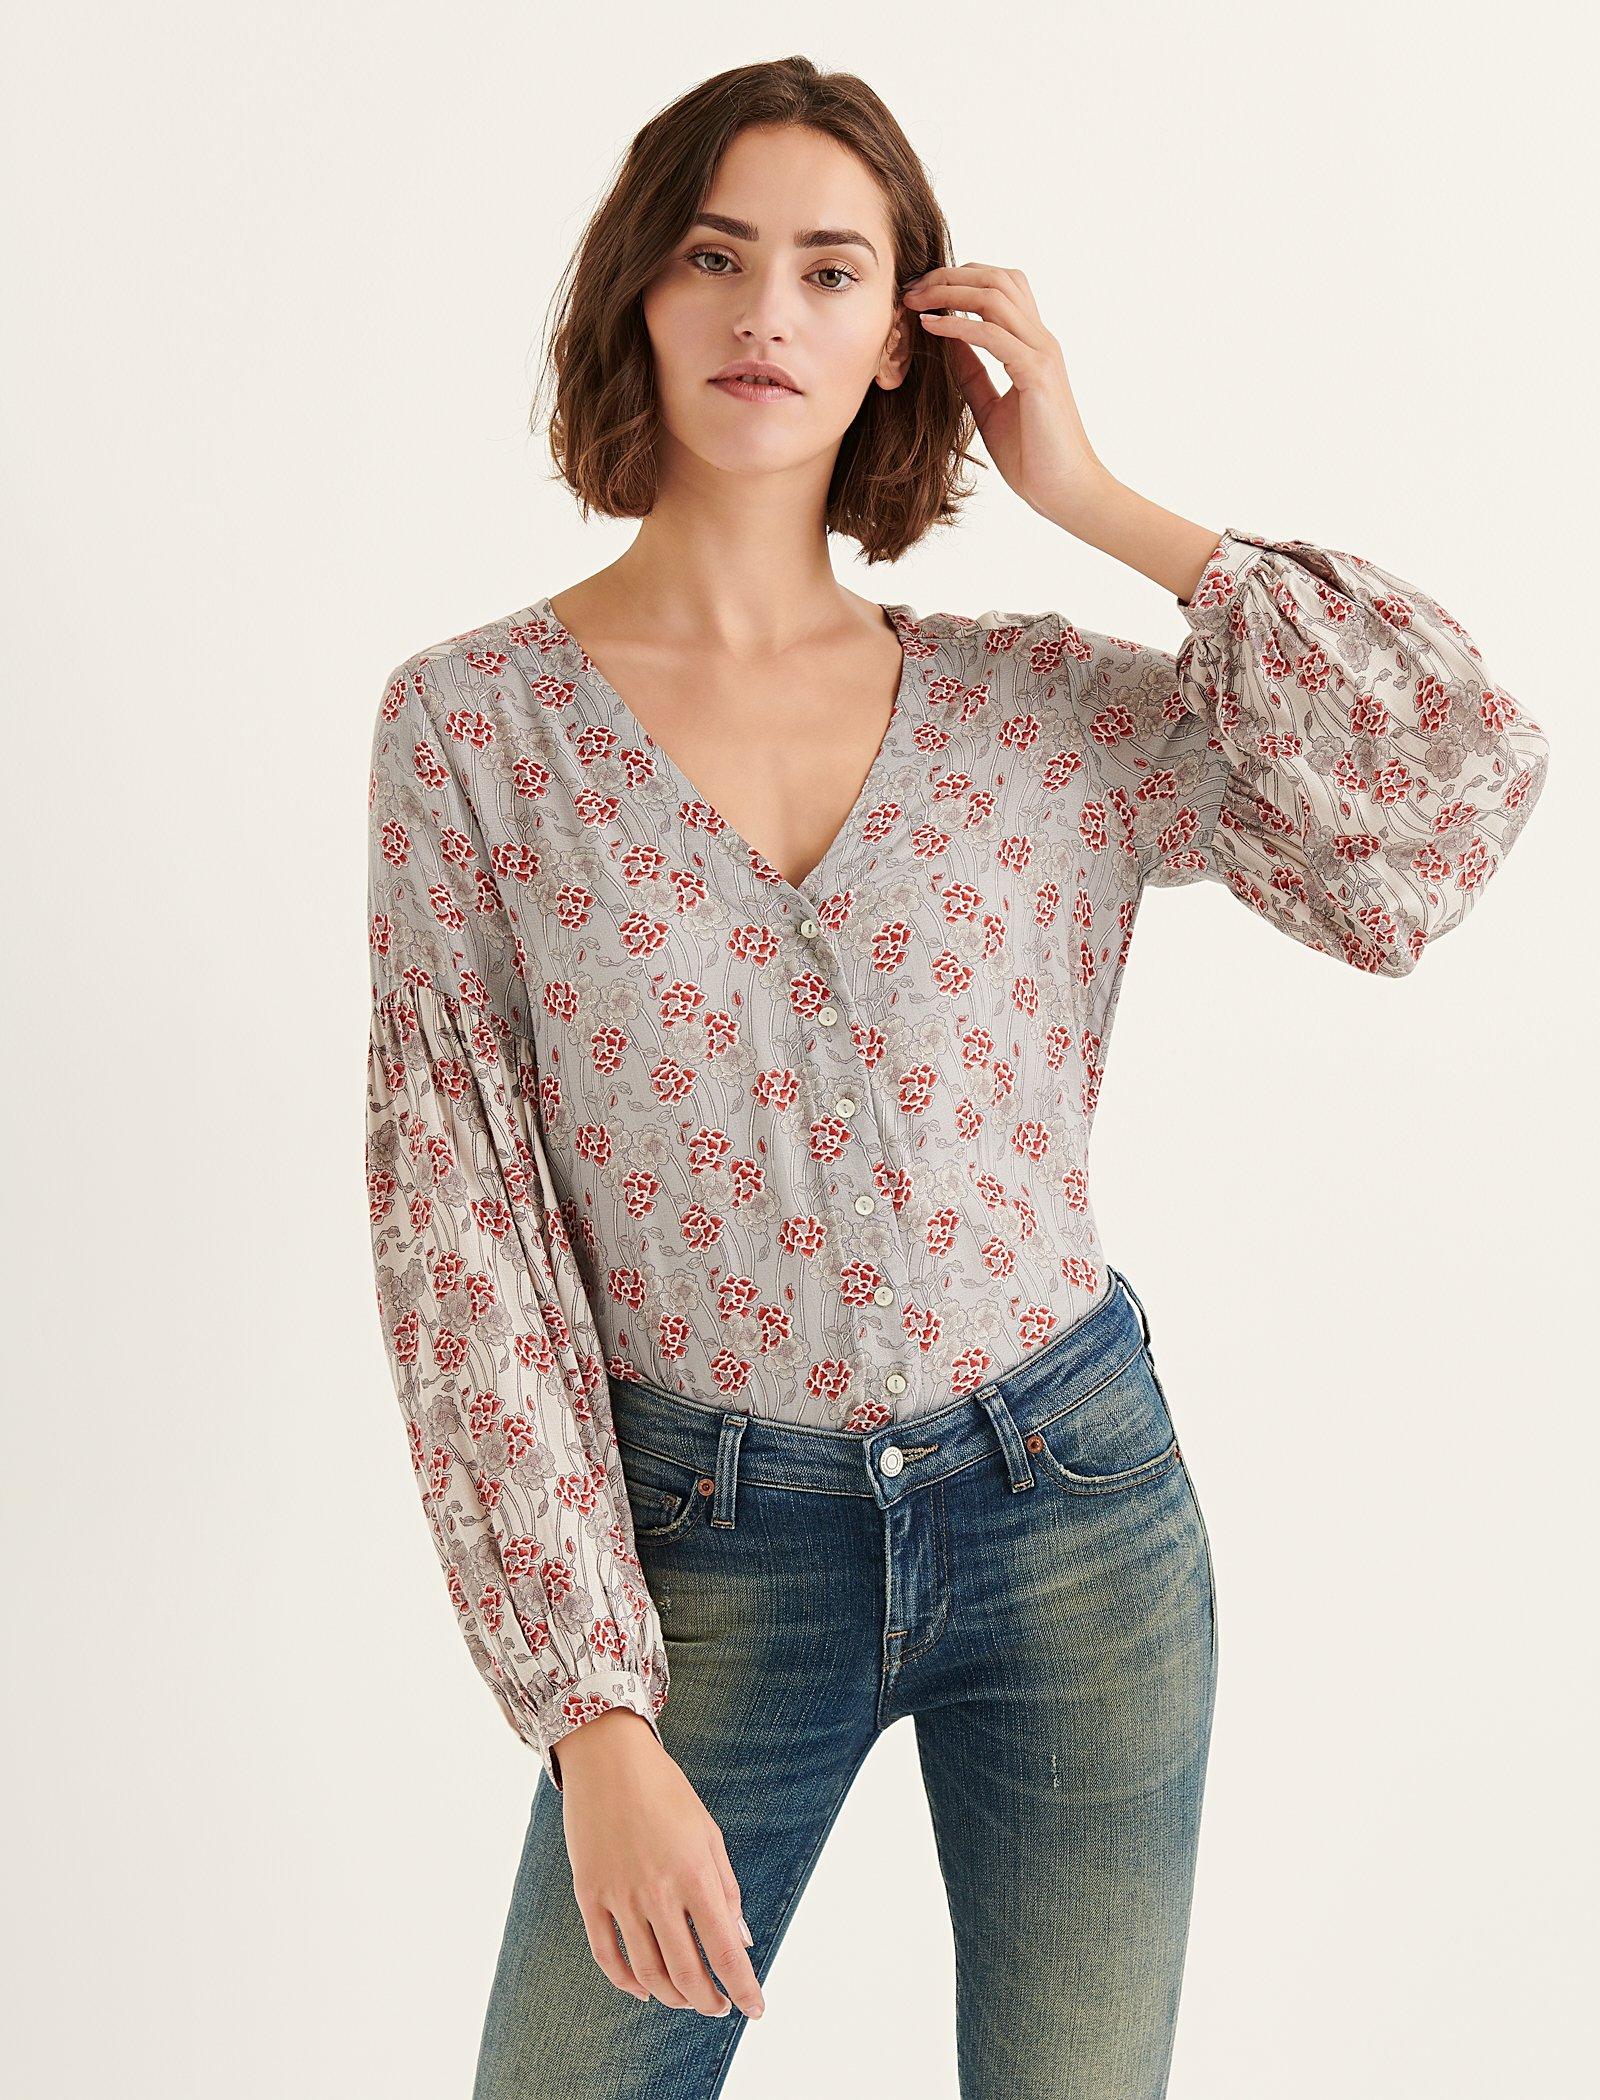 lucky brand floral top